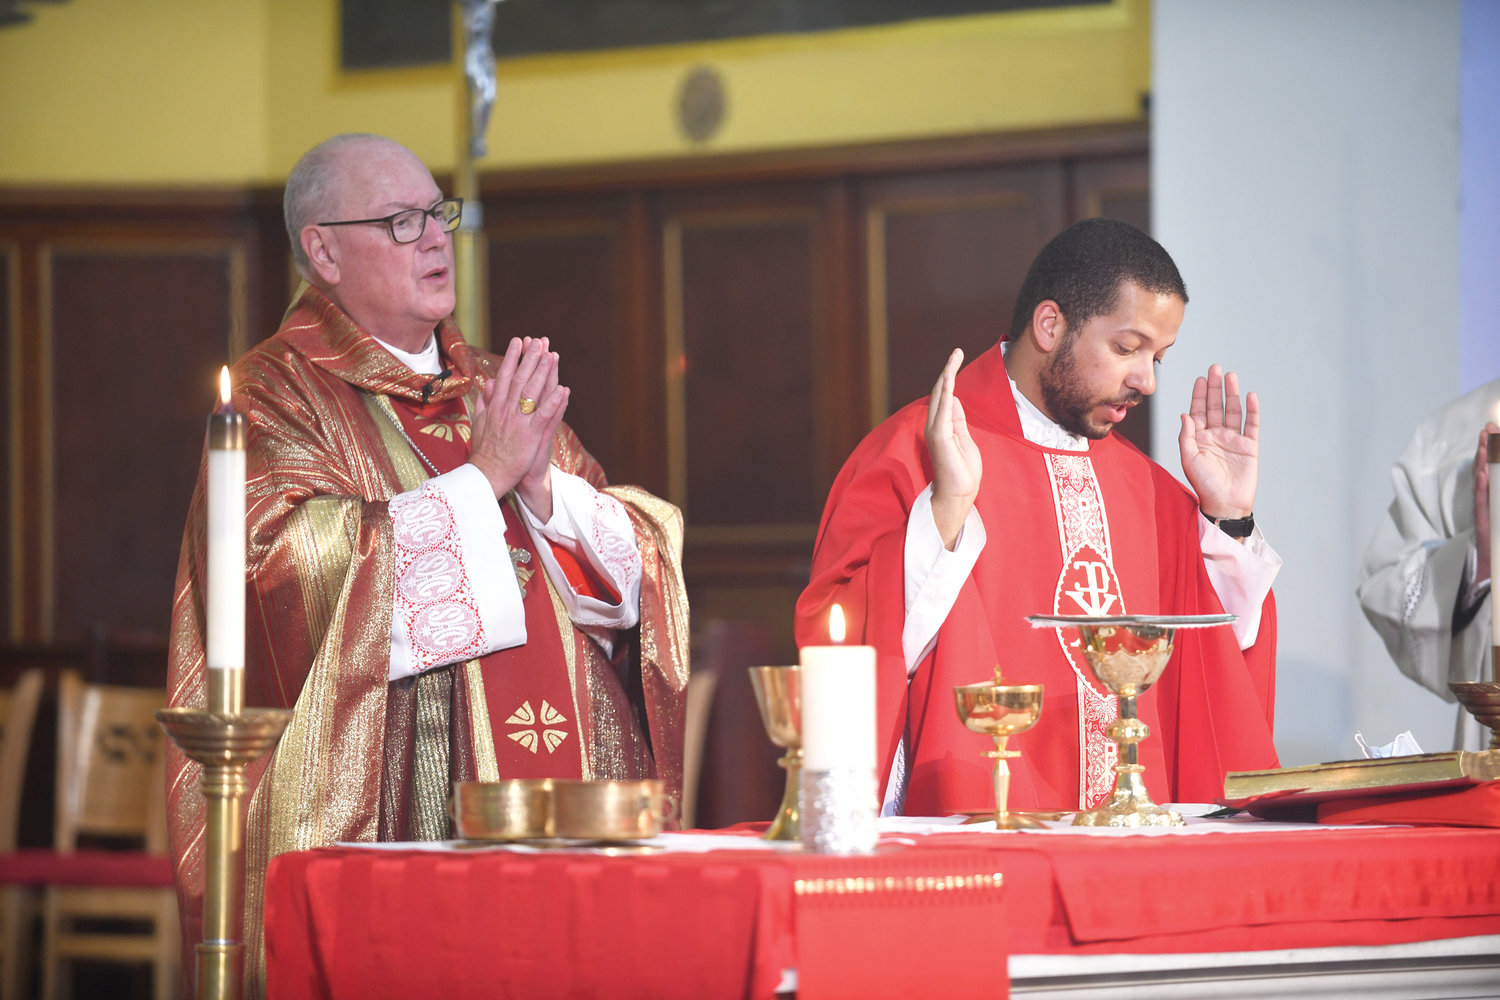 Cardinal Dolan serves as principal celebrant at the Mass of the Holy Spirit Sept. 17 for Cristo Rey New York High School at next door St. Cecilia and Holy Agony Church in East Harlem. Father Steven Gonzalez, a 2010 alumnus of Cristo Rey, to the cardinal’s right, was among the principal concelebrants.